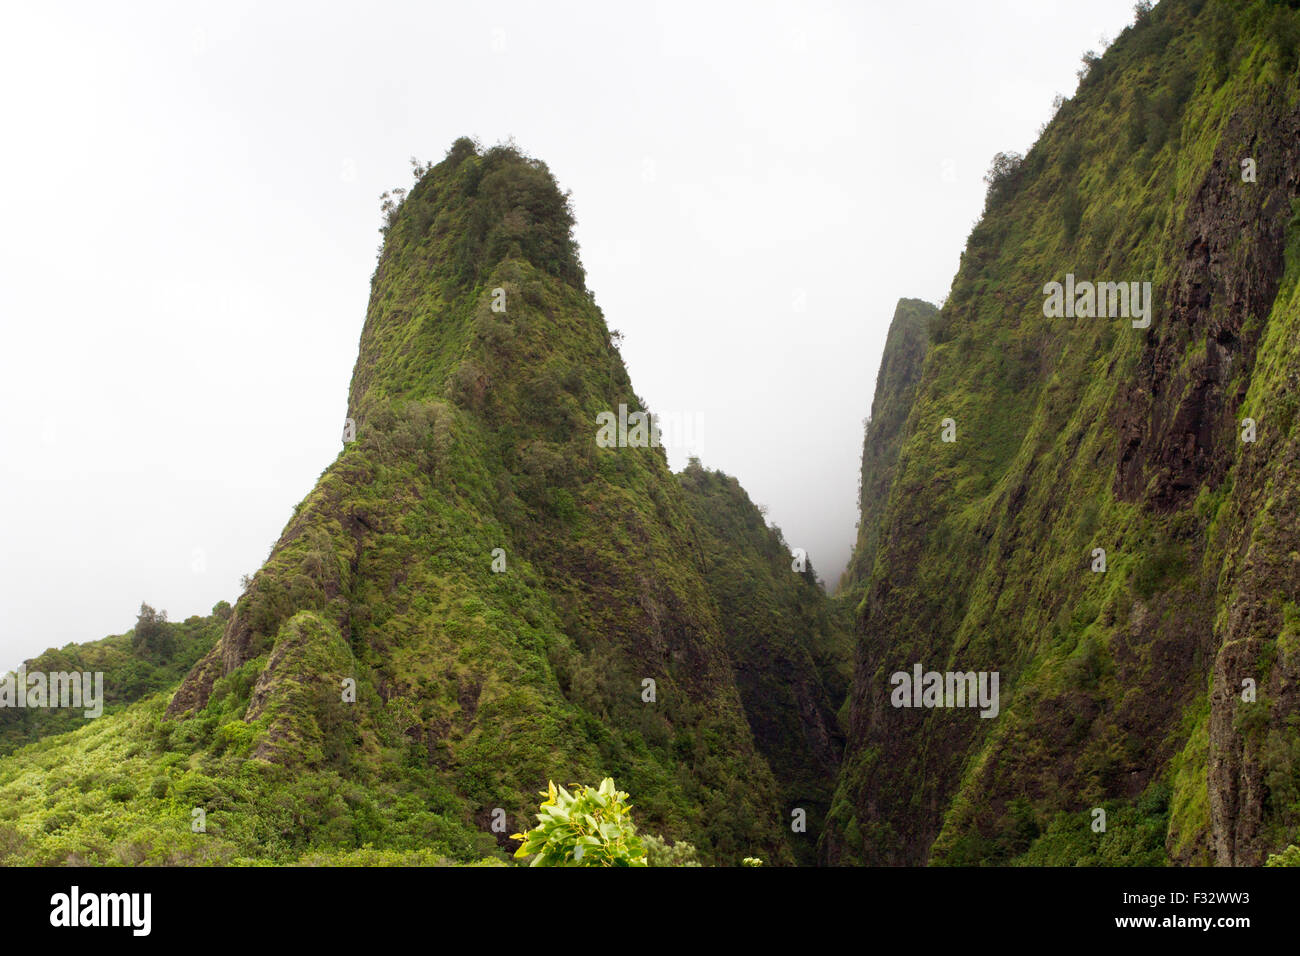 The Iao Needle, Iao Valley, National Natural Landmark in West Maui, Hawaii, on a misty day in August Stock Photo